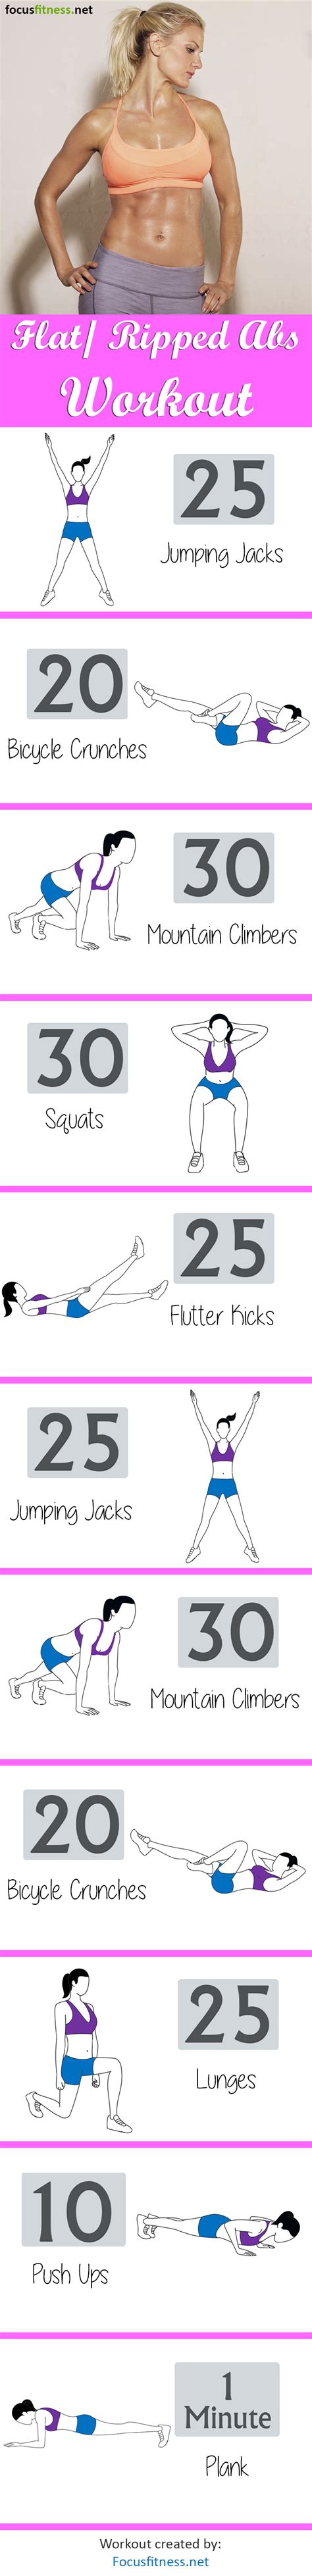 Flat Abs Workout For Women Focus Fitness